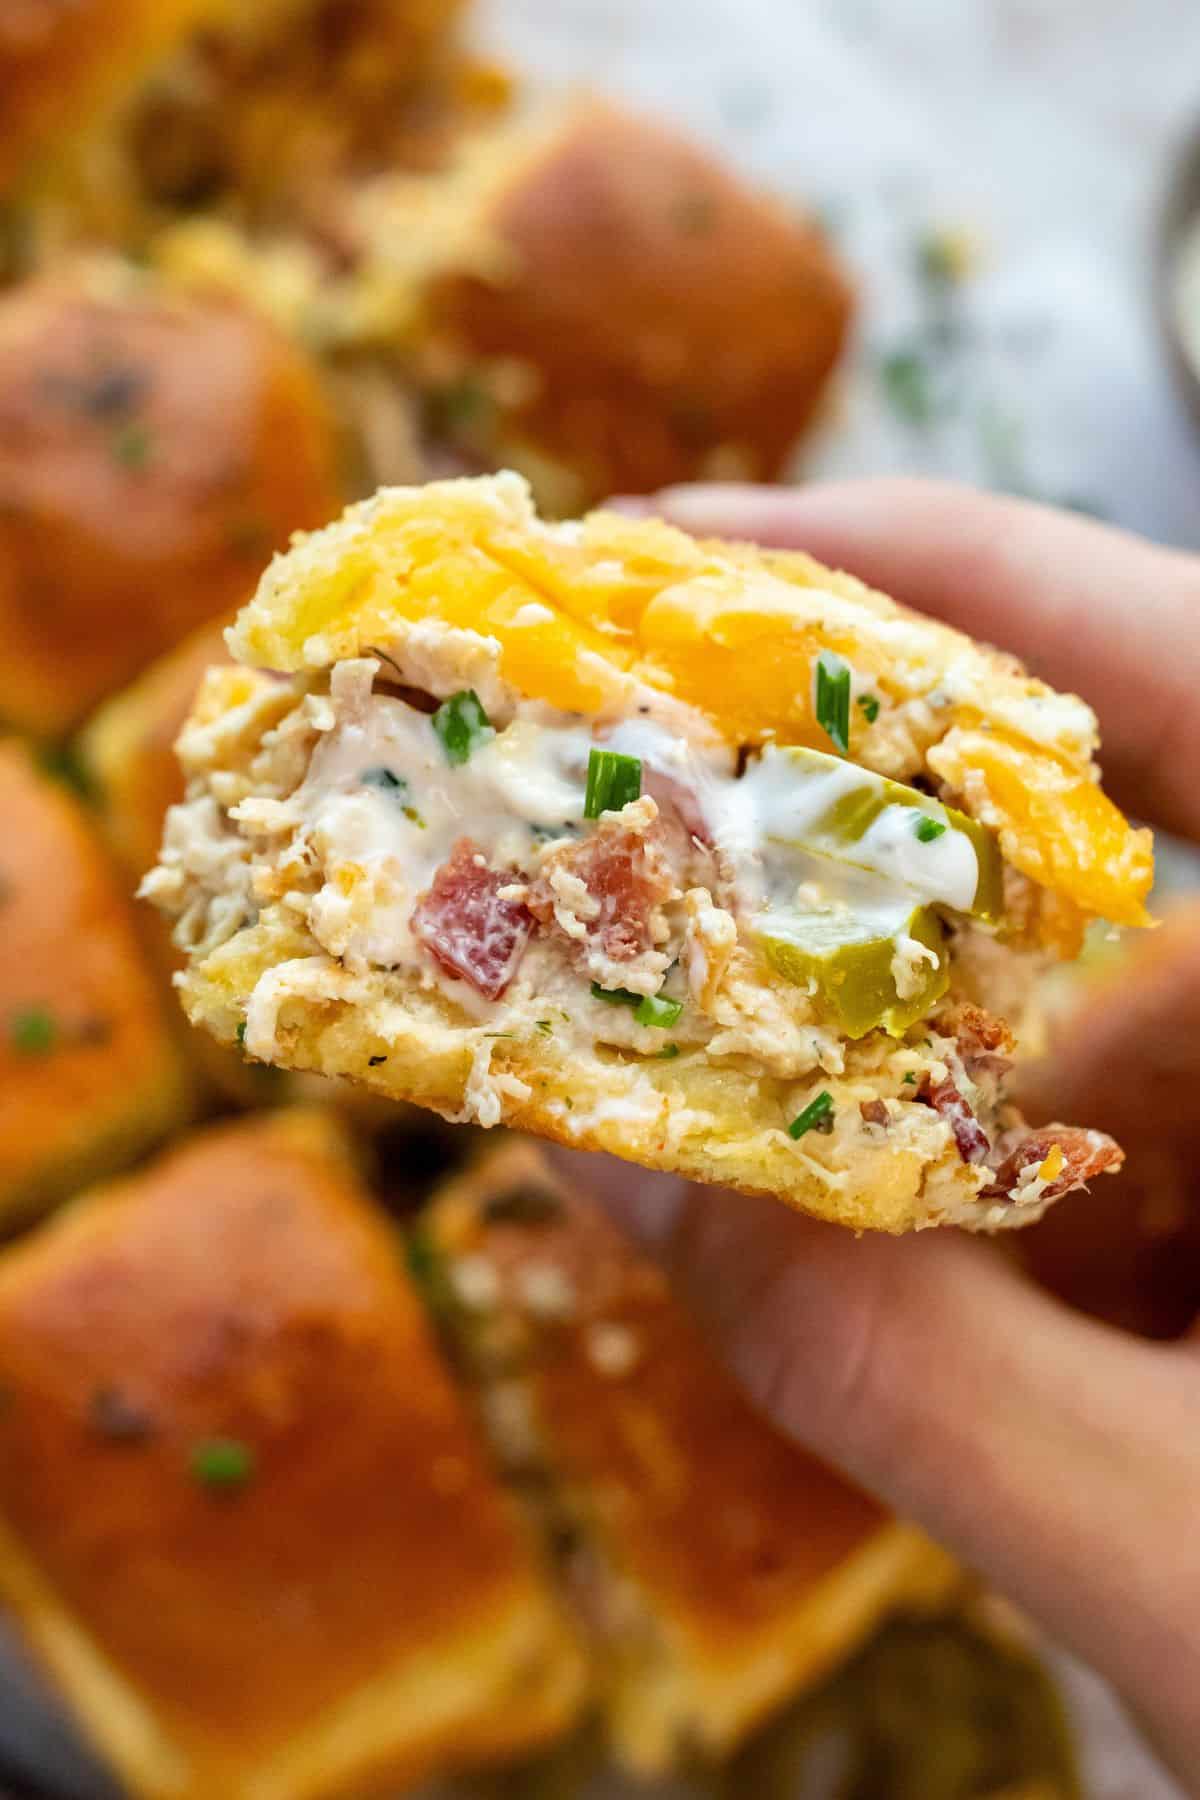 Slider buns stuffed with shredded chicken and bacon in a hand up close. 